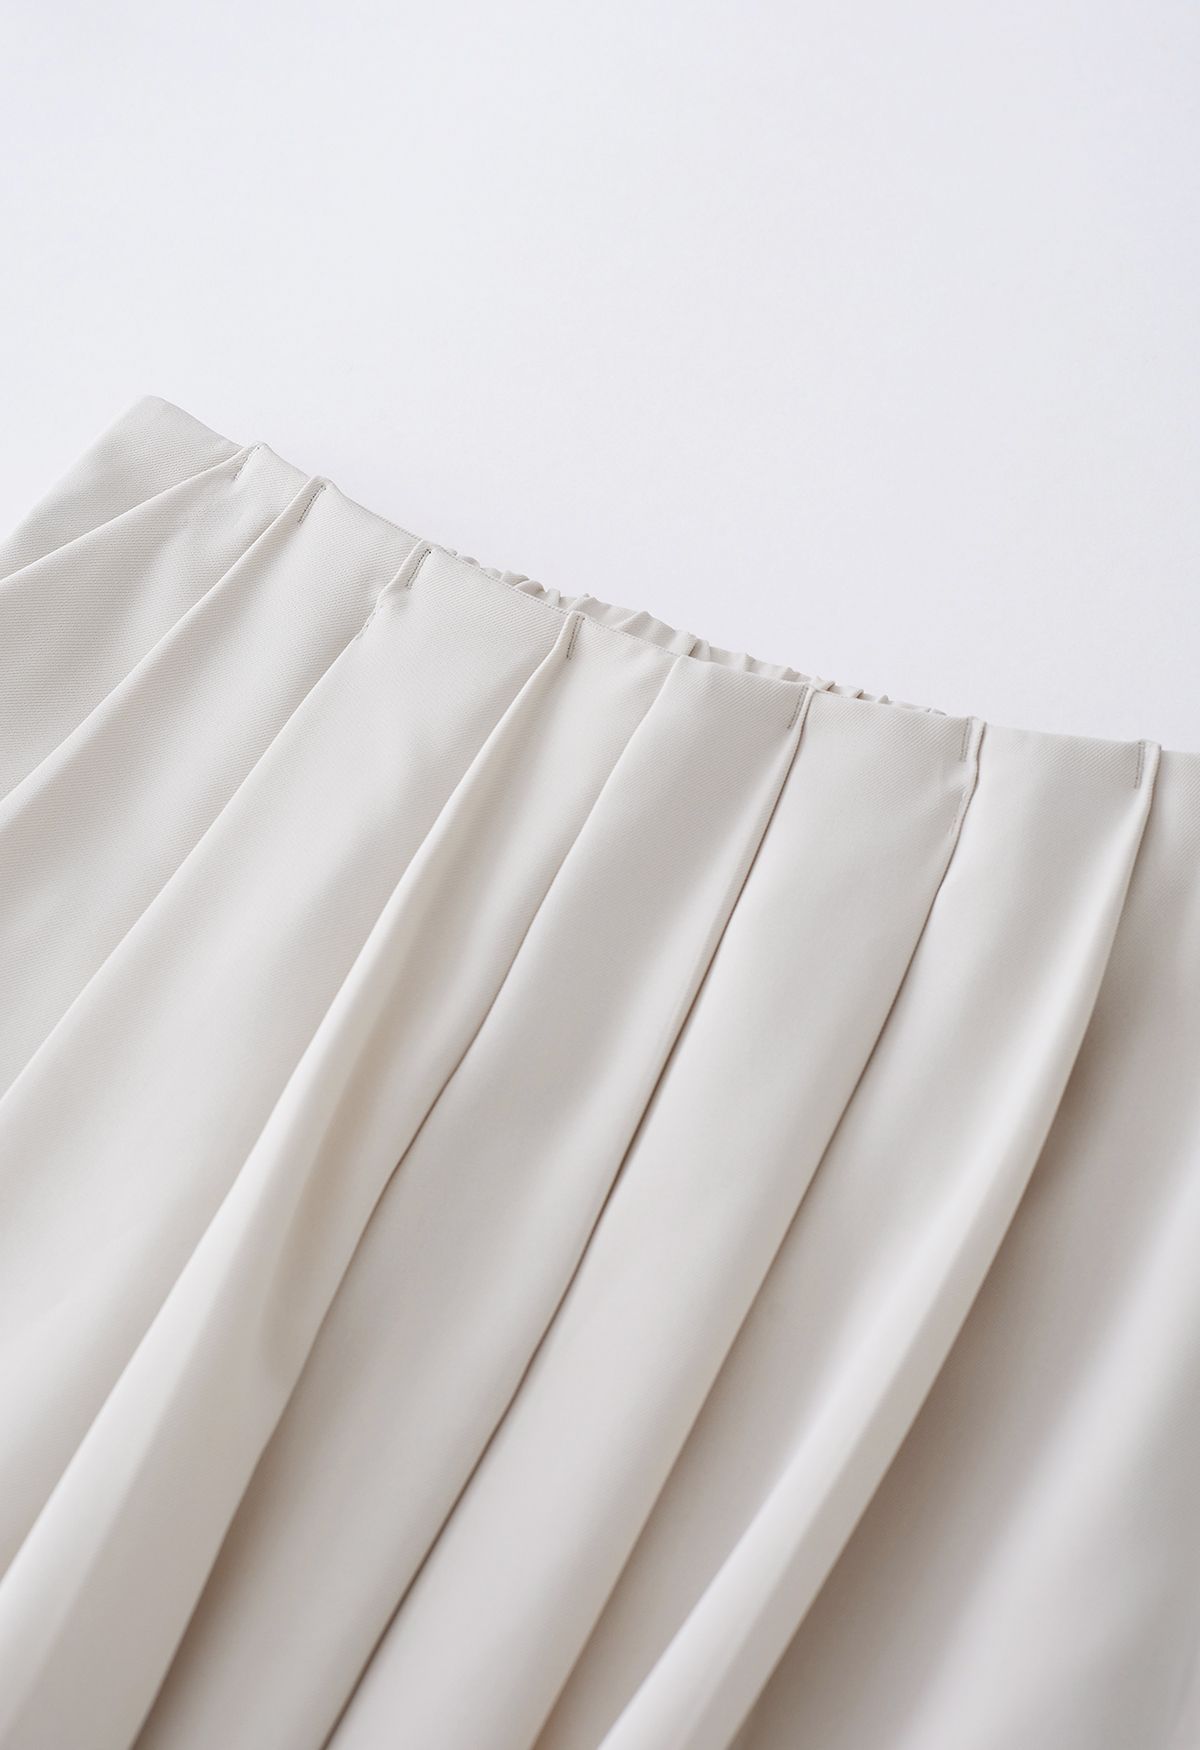 Fanciful Pleats Wide-Leg Pants in Ivory | Chicwish